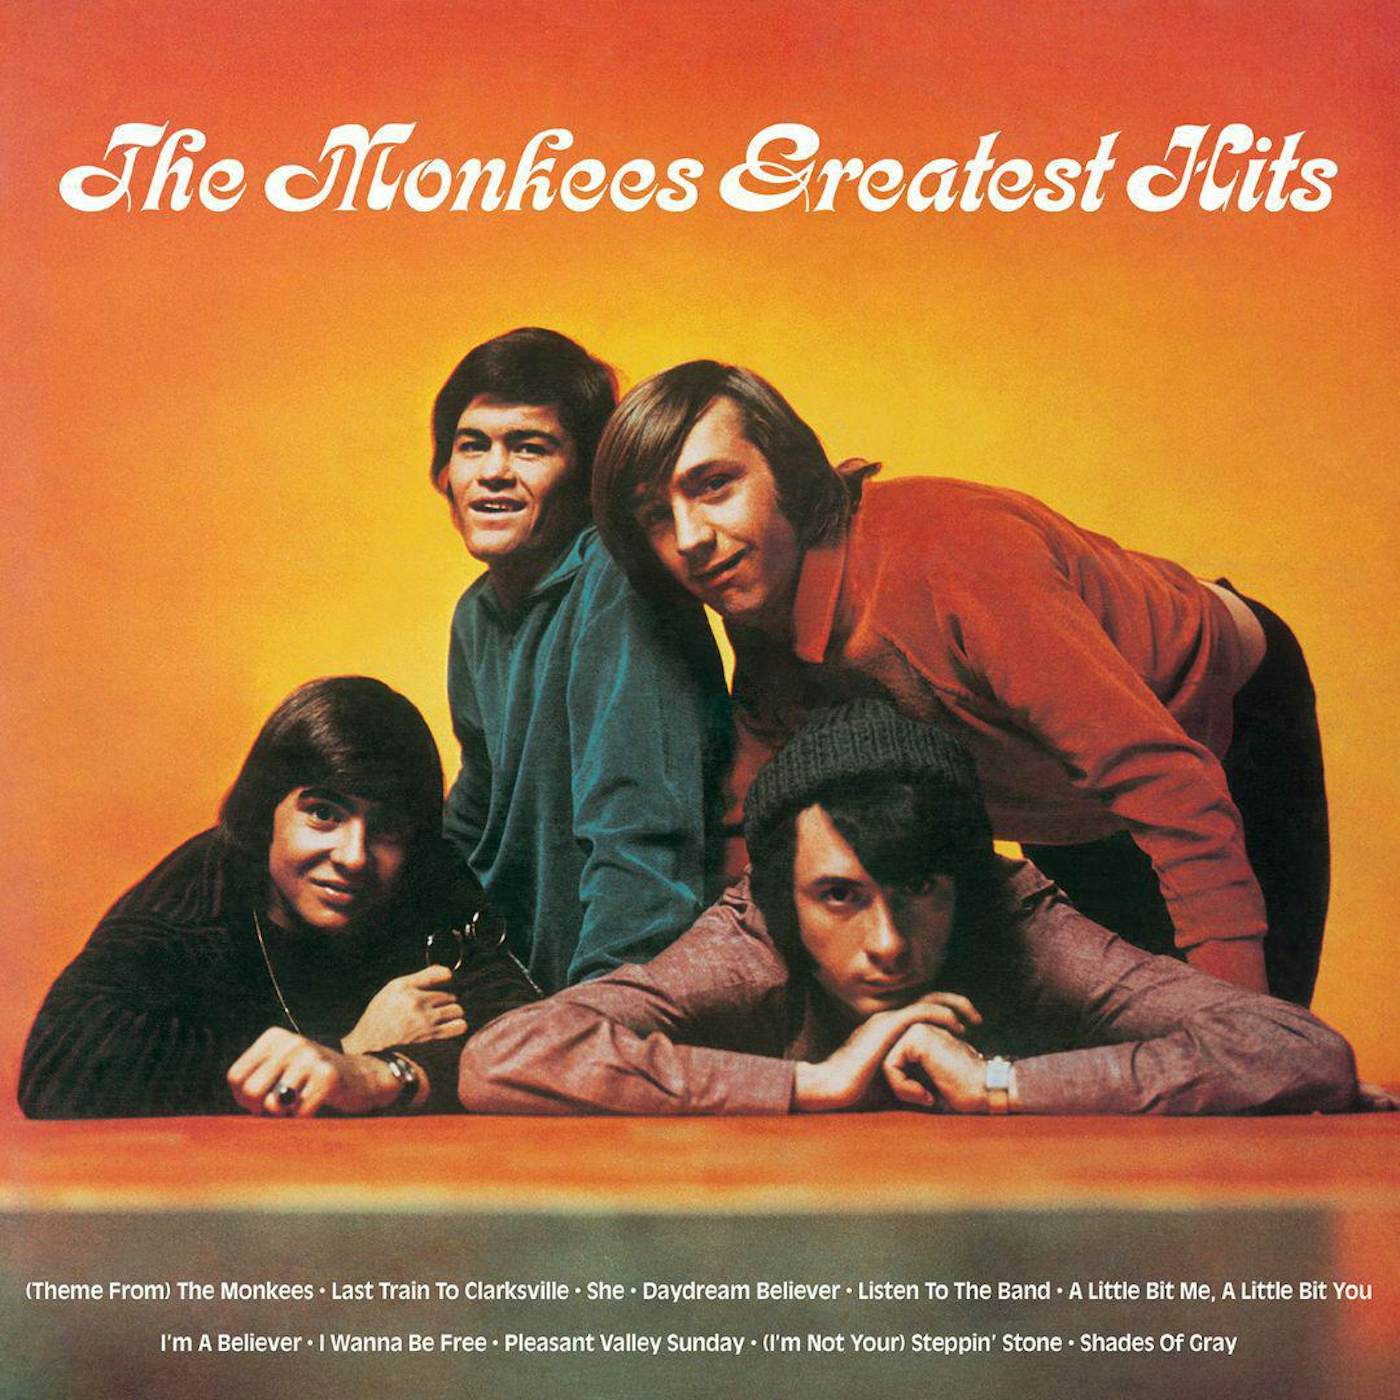 The Monkees Greatest Hits Vinyl Record